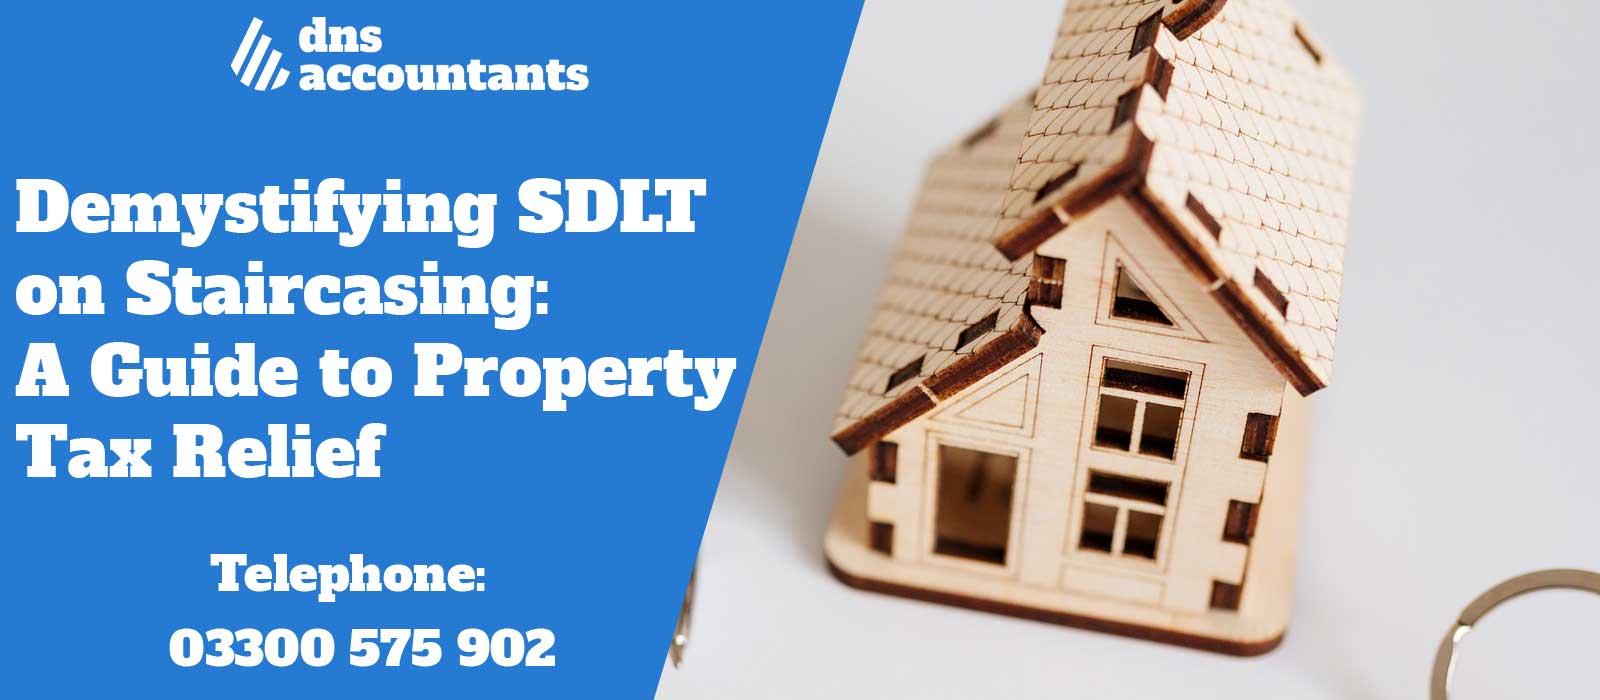 Demystifying SDLT on Staircasing: A Guide to Property Tax Relief